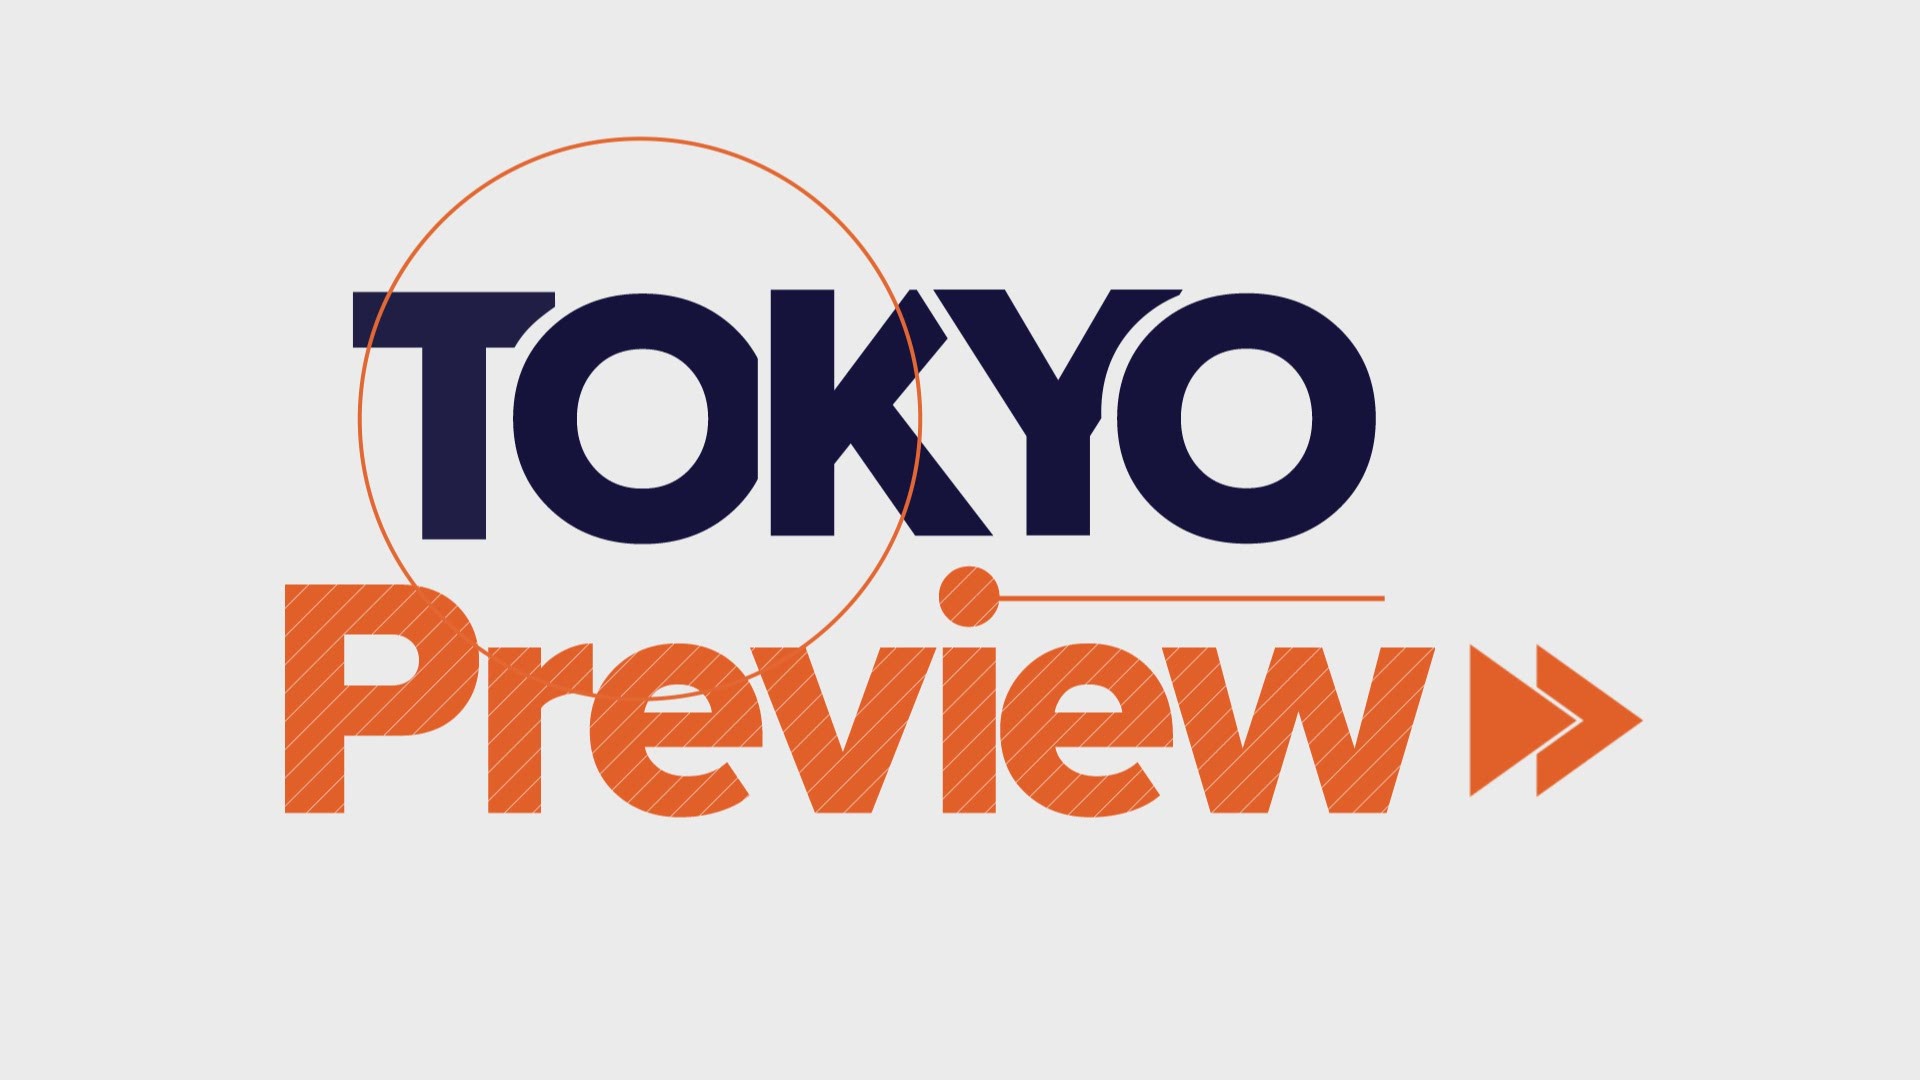 Saturday marks the 1st full day of competition at the Tokyo Olympics. The pool is open, the surf is up and 3 new sports debut. Here's the Tokyo Preview for July 24.